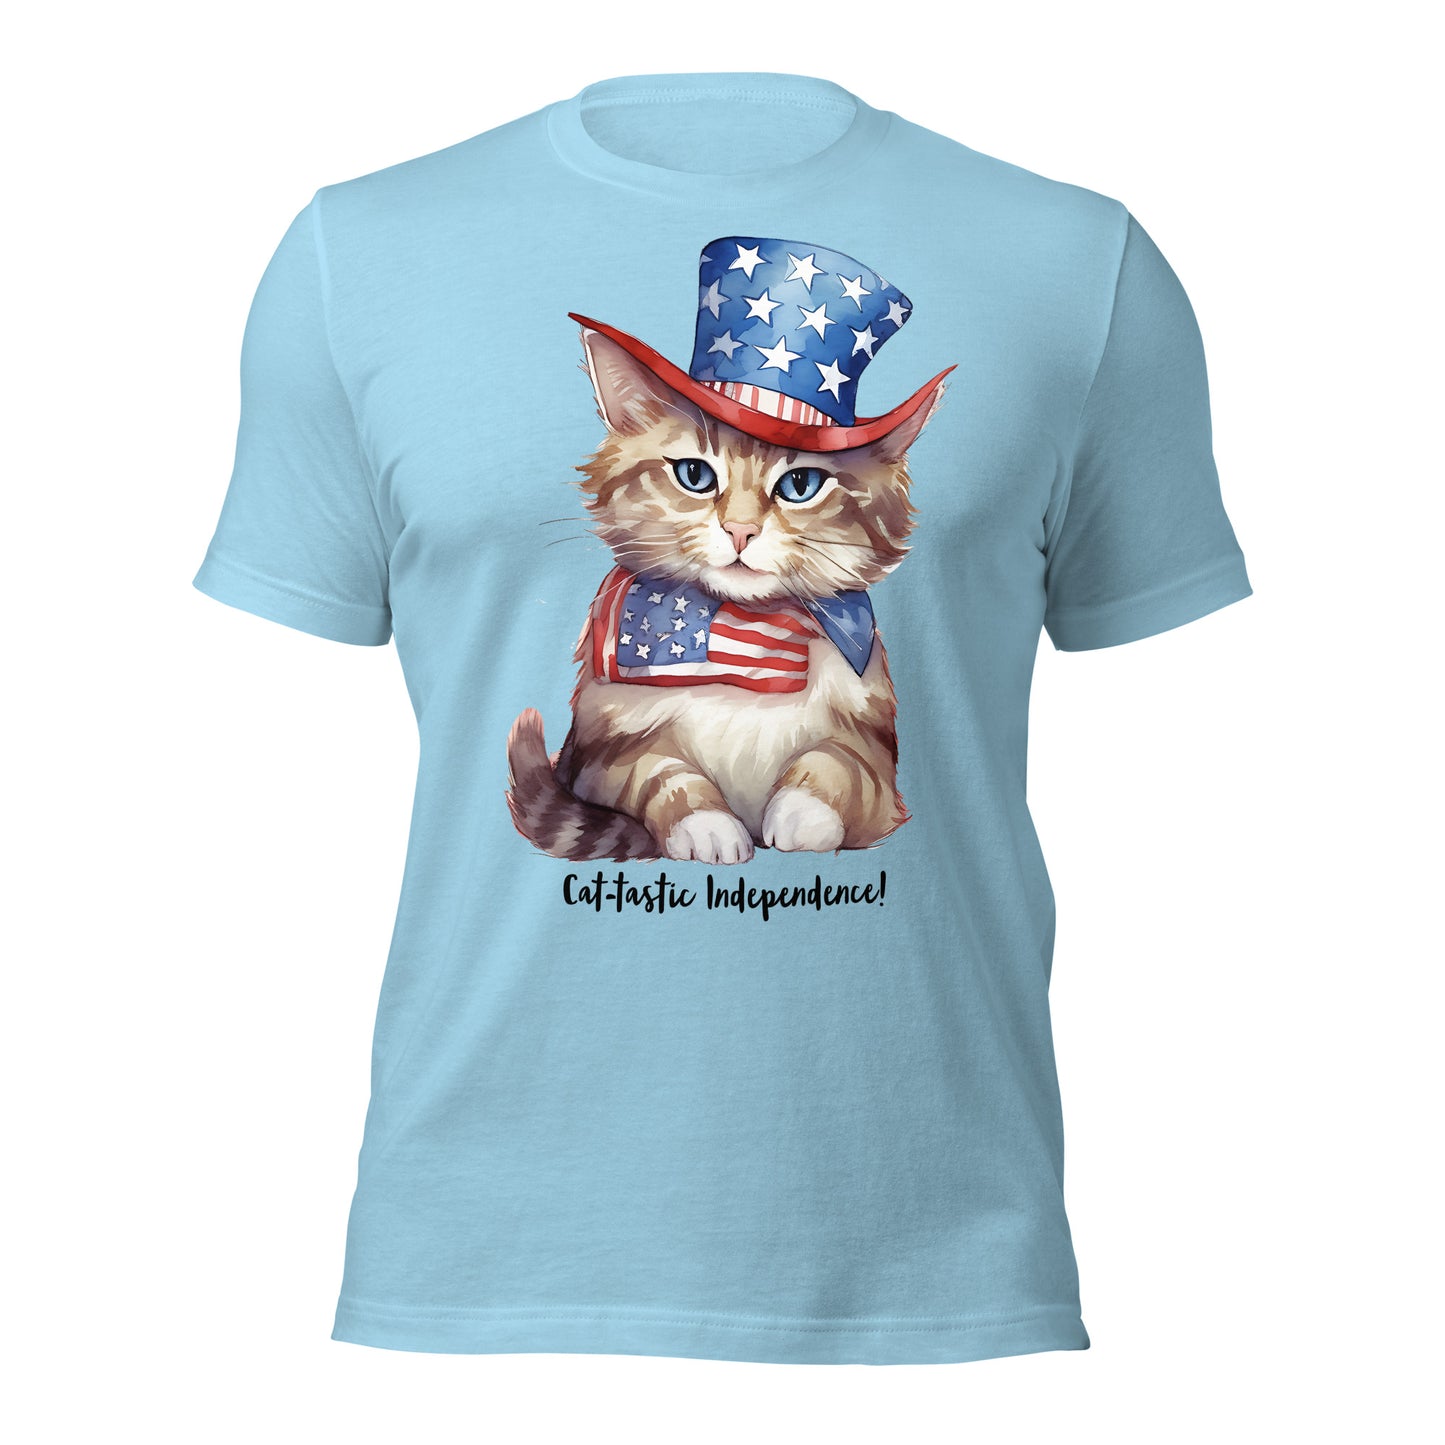 Patriotic Cat Tshirt With Customizable Text  For Cat Lovers Blue Color